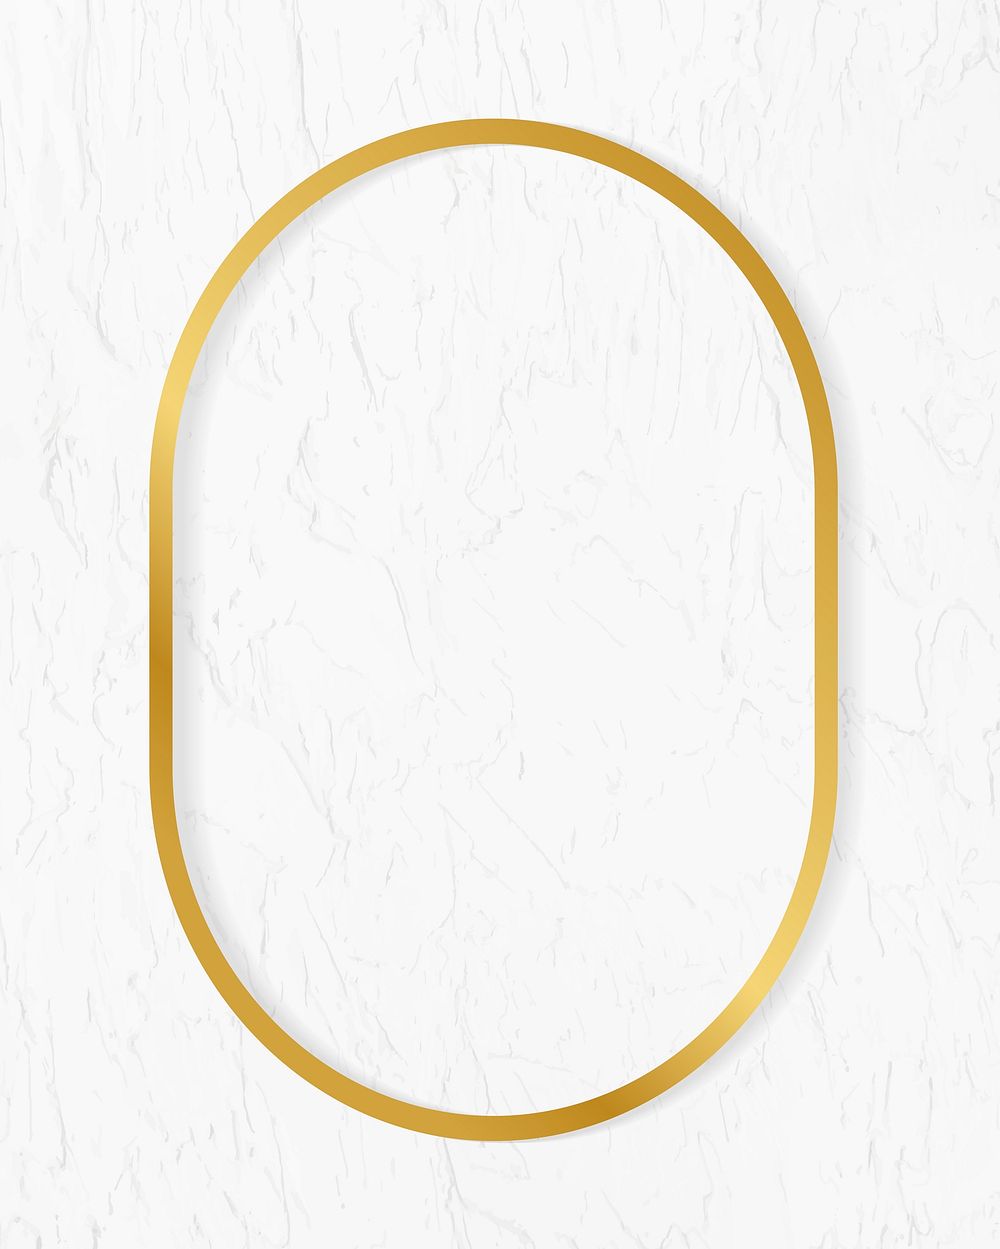 Golden framed oval on a stucco wall textured vector